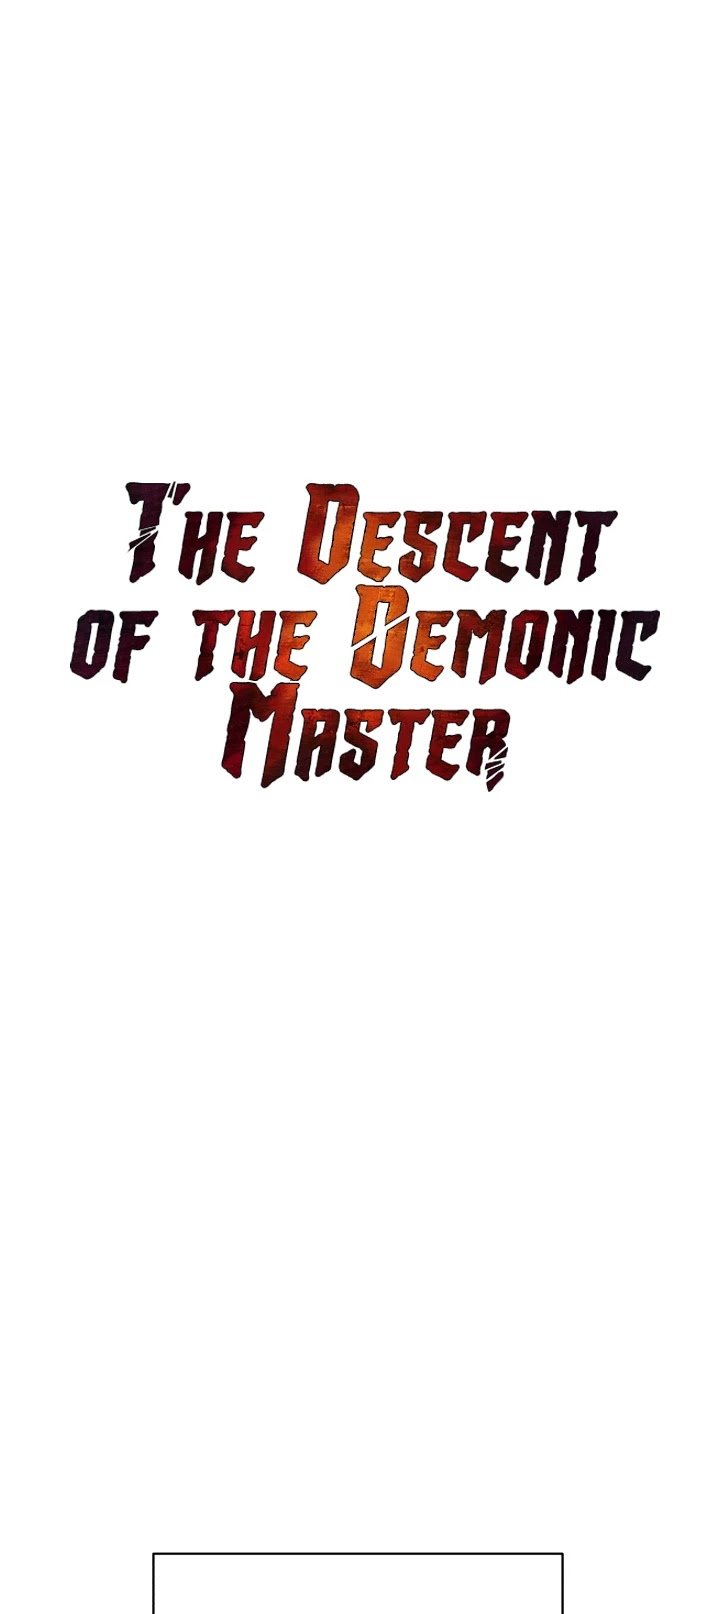 the descent of the demonic master chapter